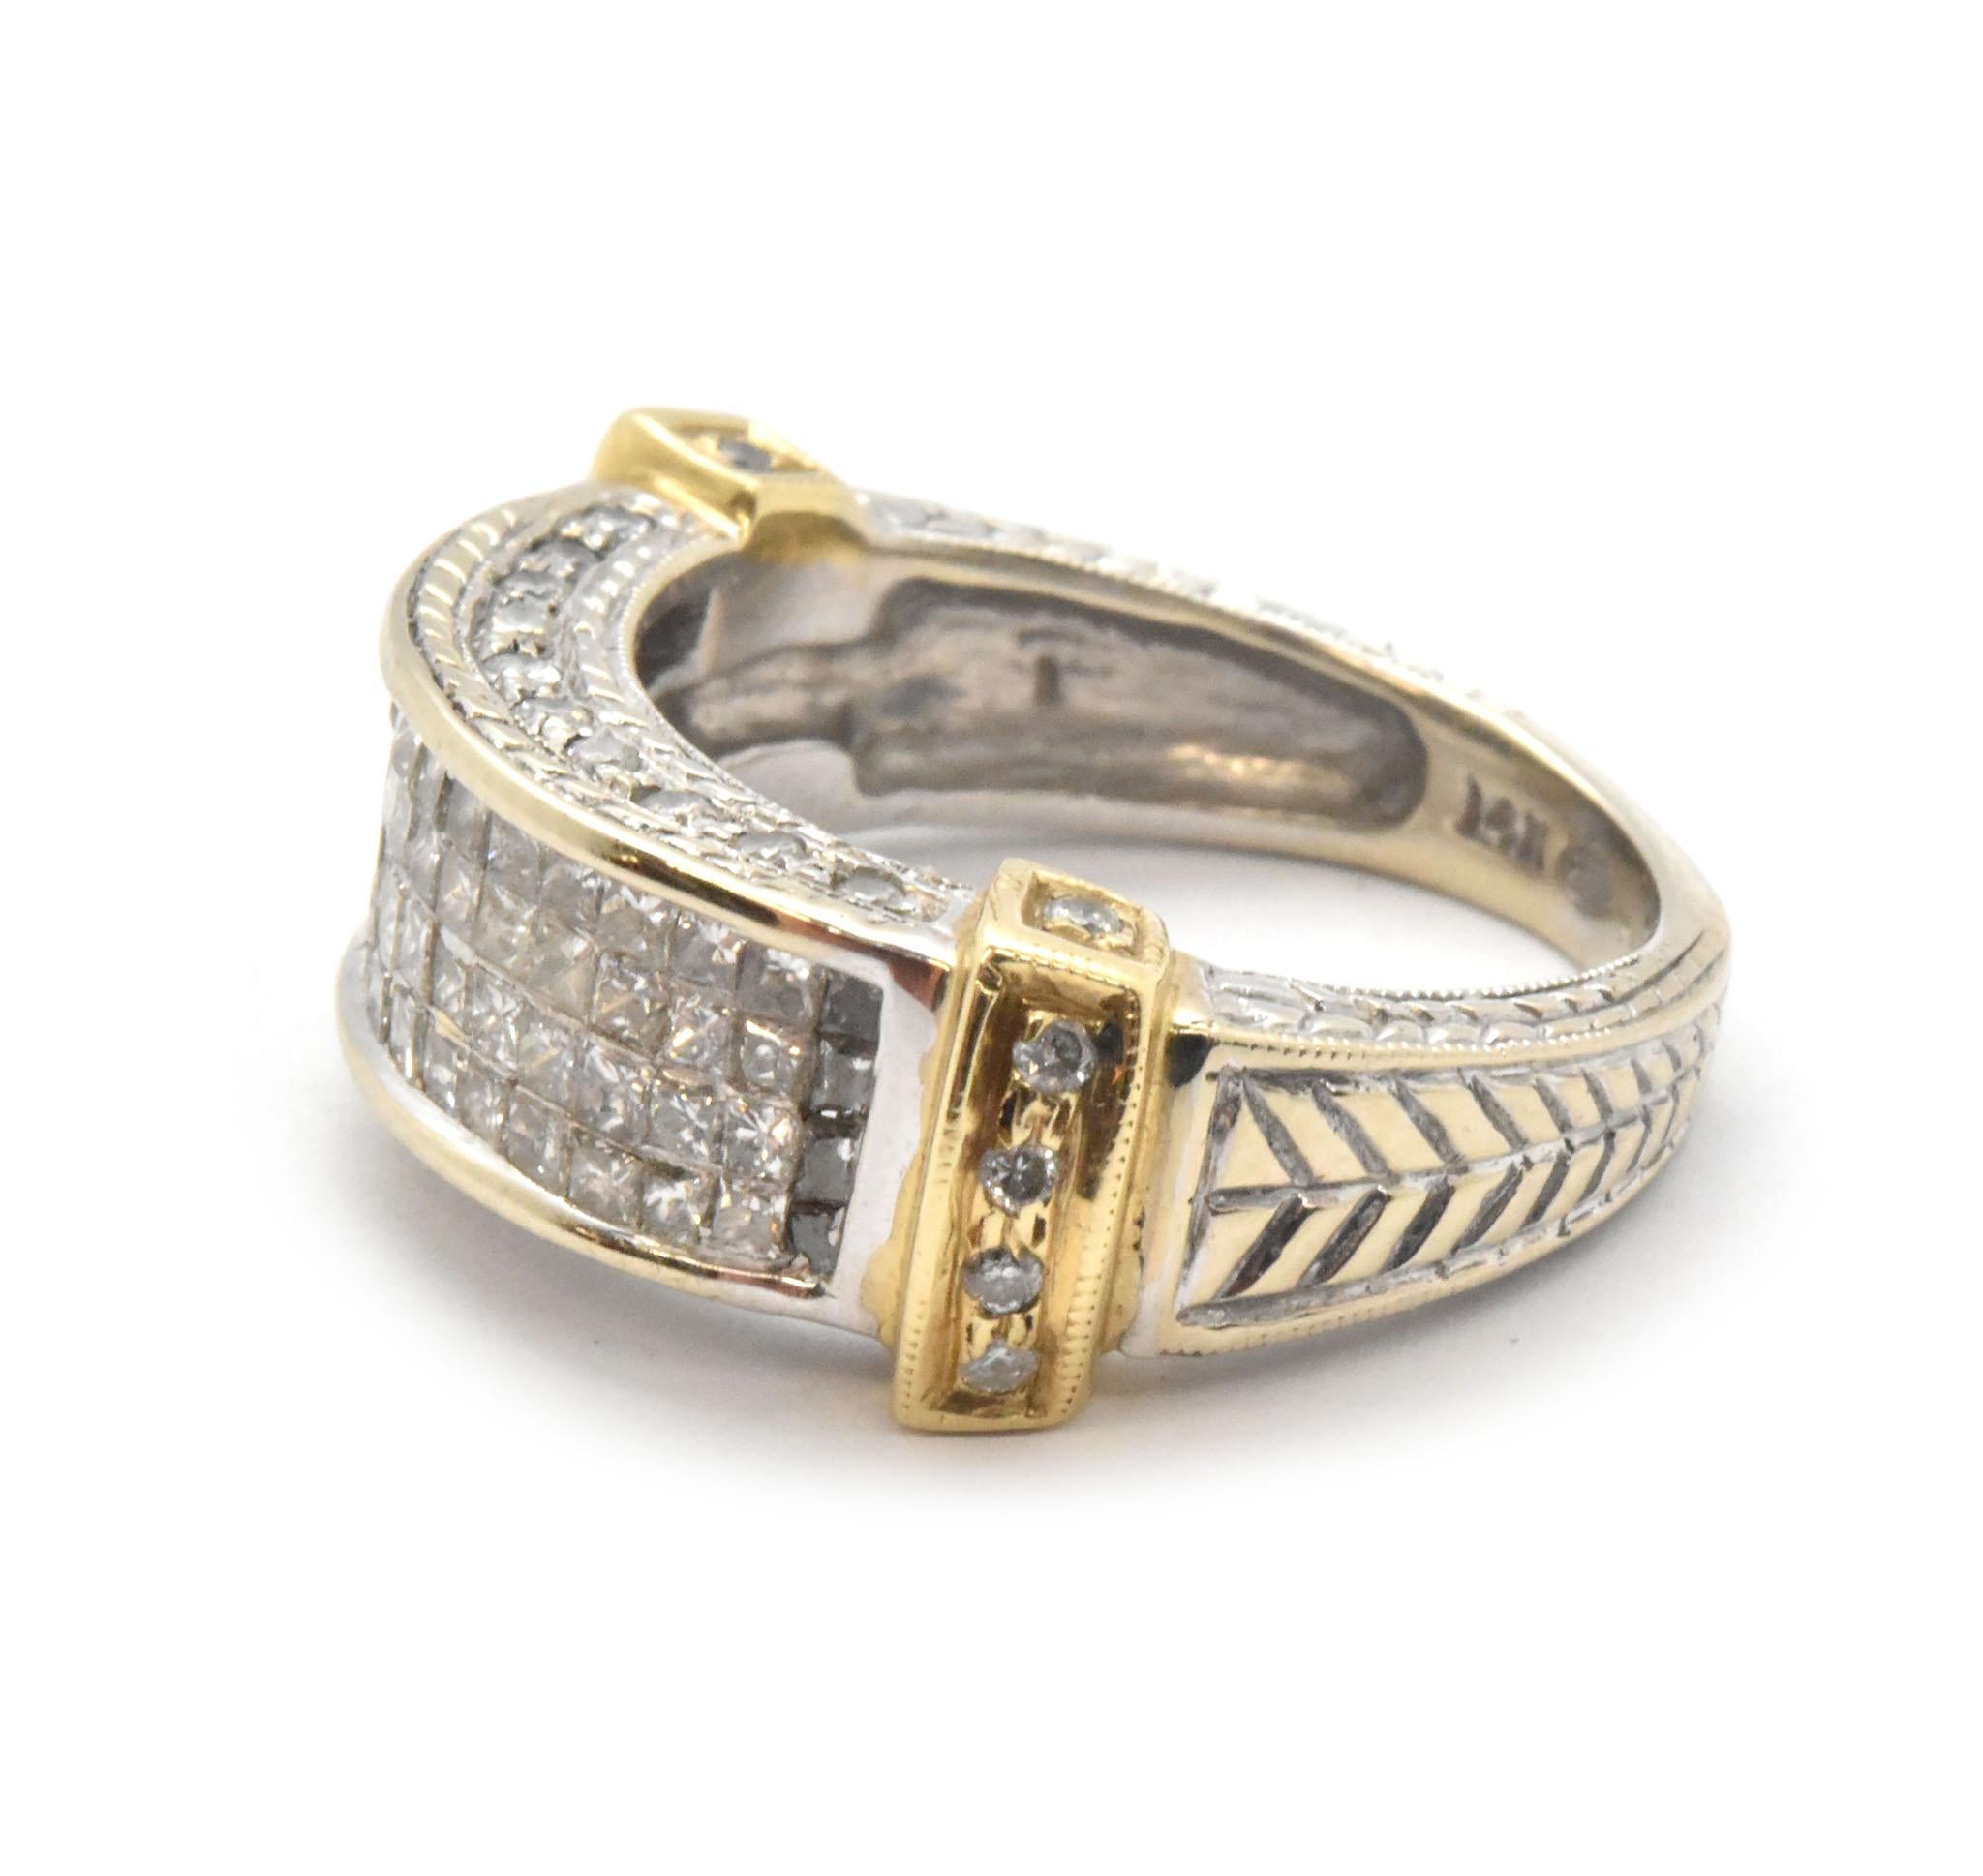 Two-Tone 14 Karat Gold and Invisible Set of Diamond Band Ring 1.28 Carat (Carréschliff)